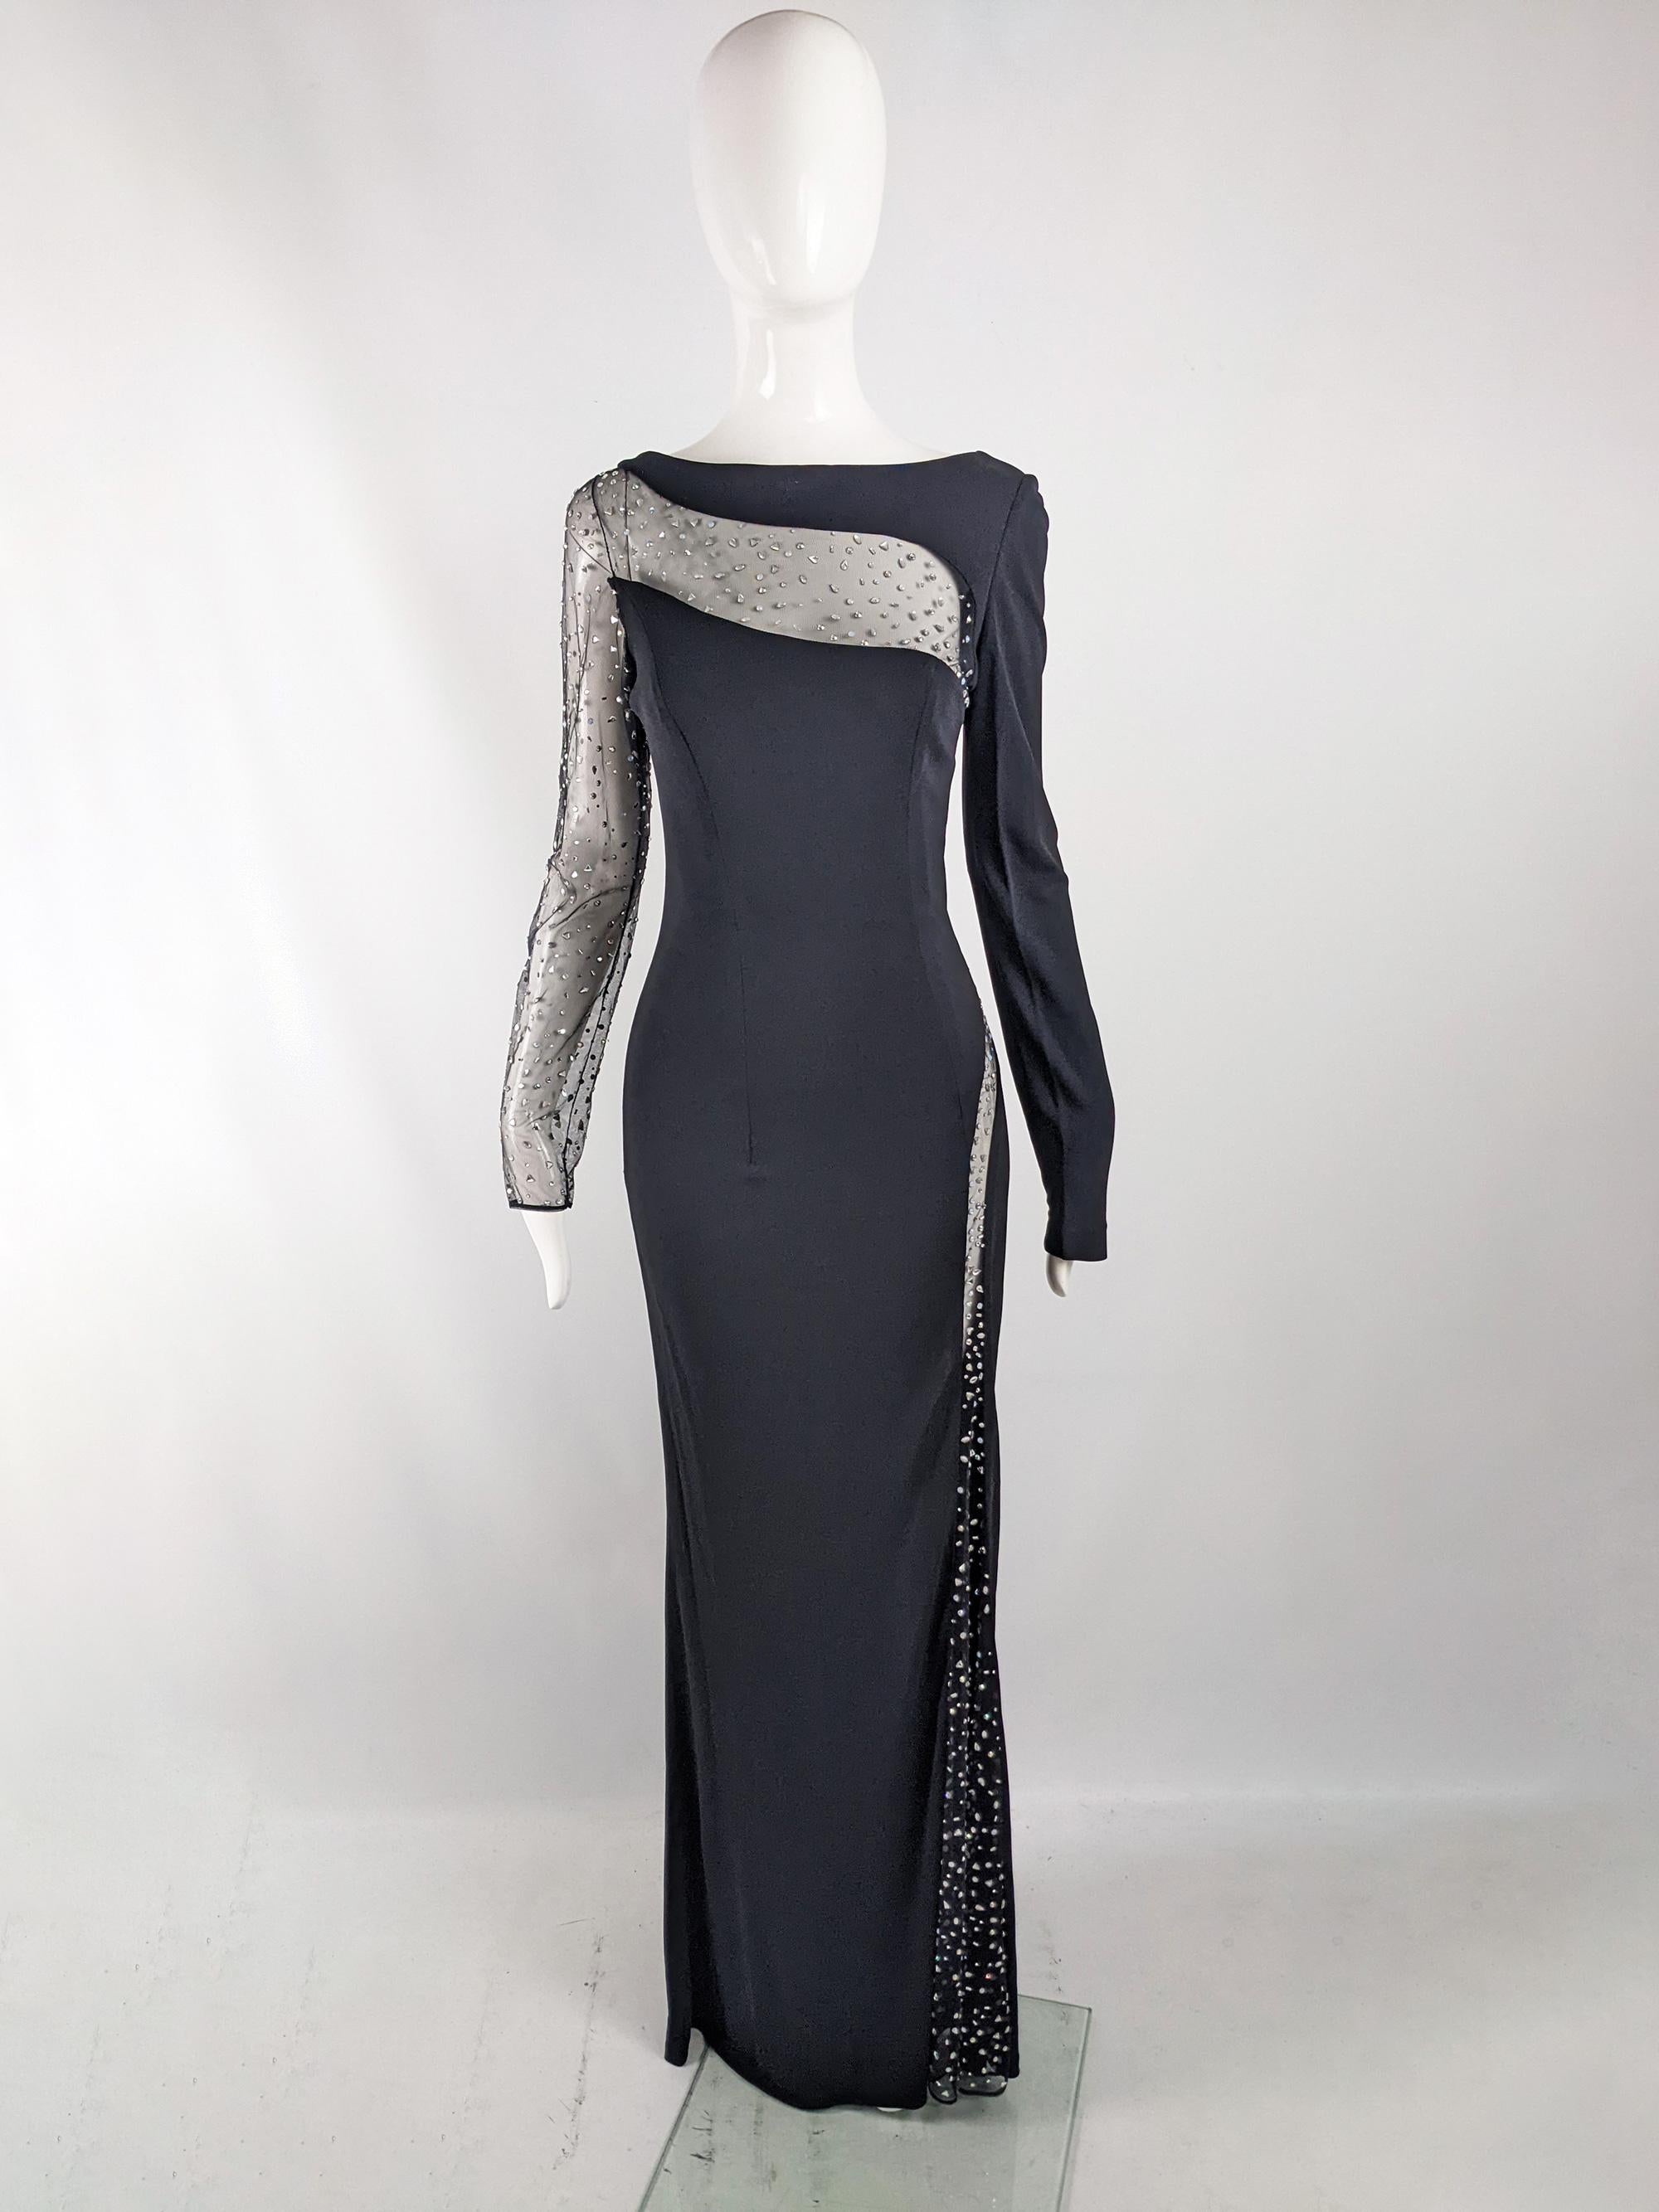 A breathtakingly sexy vintage womens evening gown from the late 80s / early 90s by luxury Monaco-based fashion house, Jiki of Monte Carlo. In a black jersey with scandalous, racy cut outs across the hip, down one leg and across the back towards the